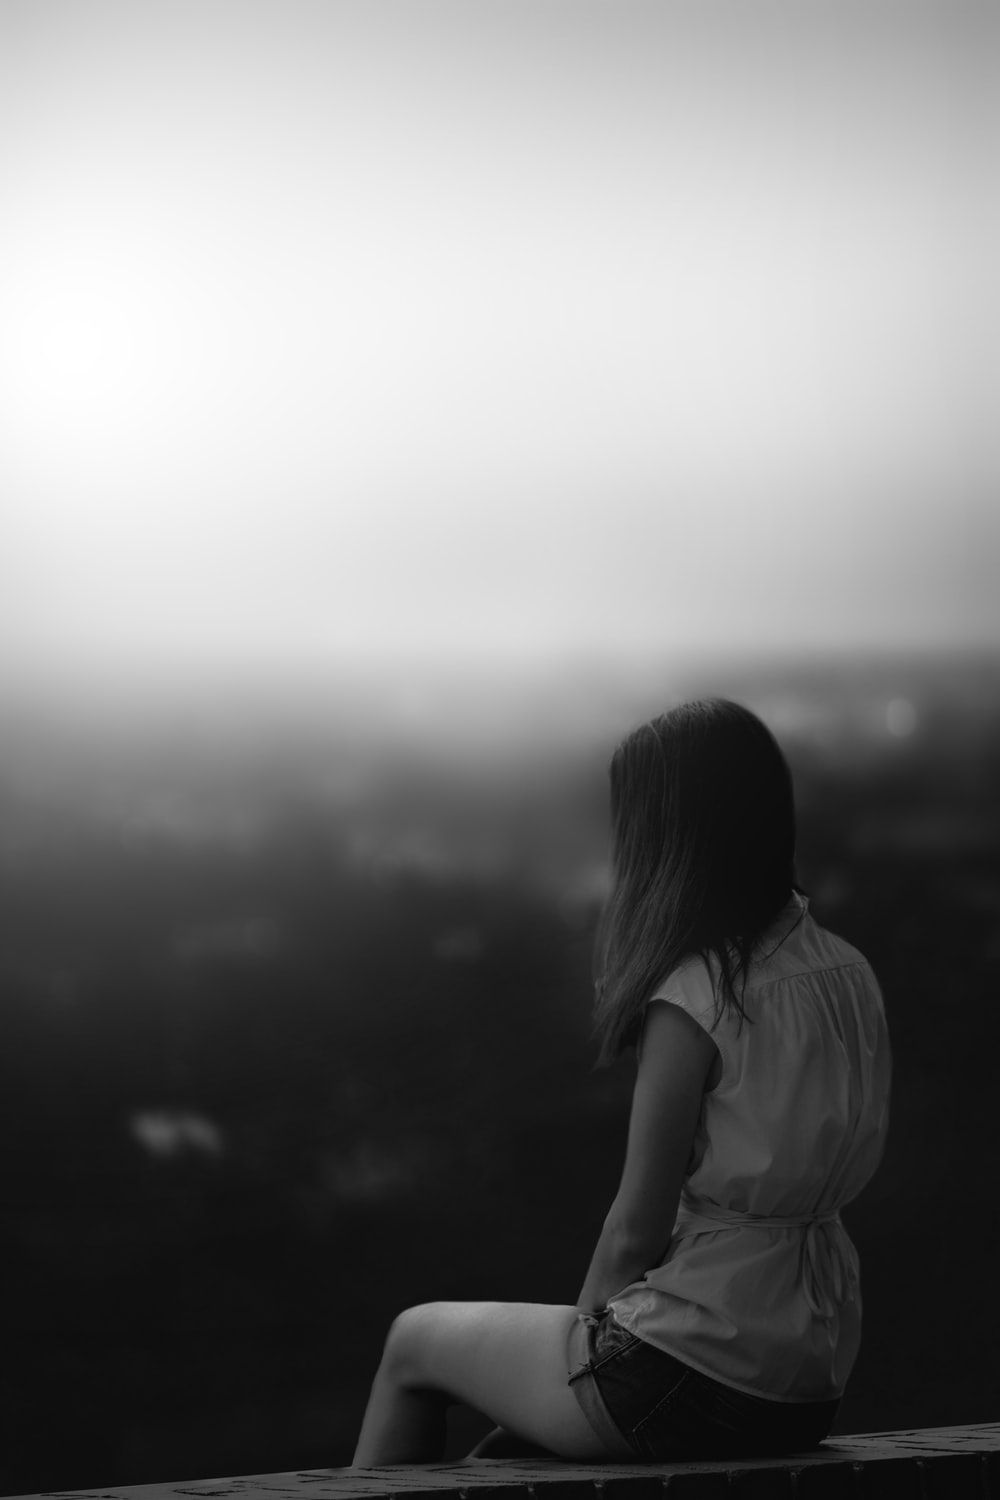 Sad Girl Picture [HQ]. Download Free Image